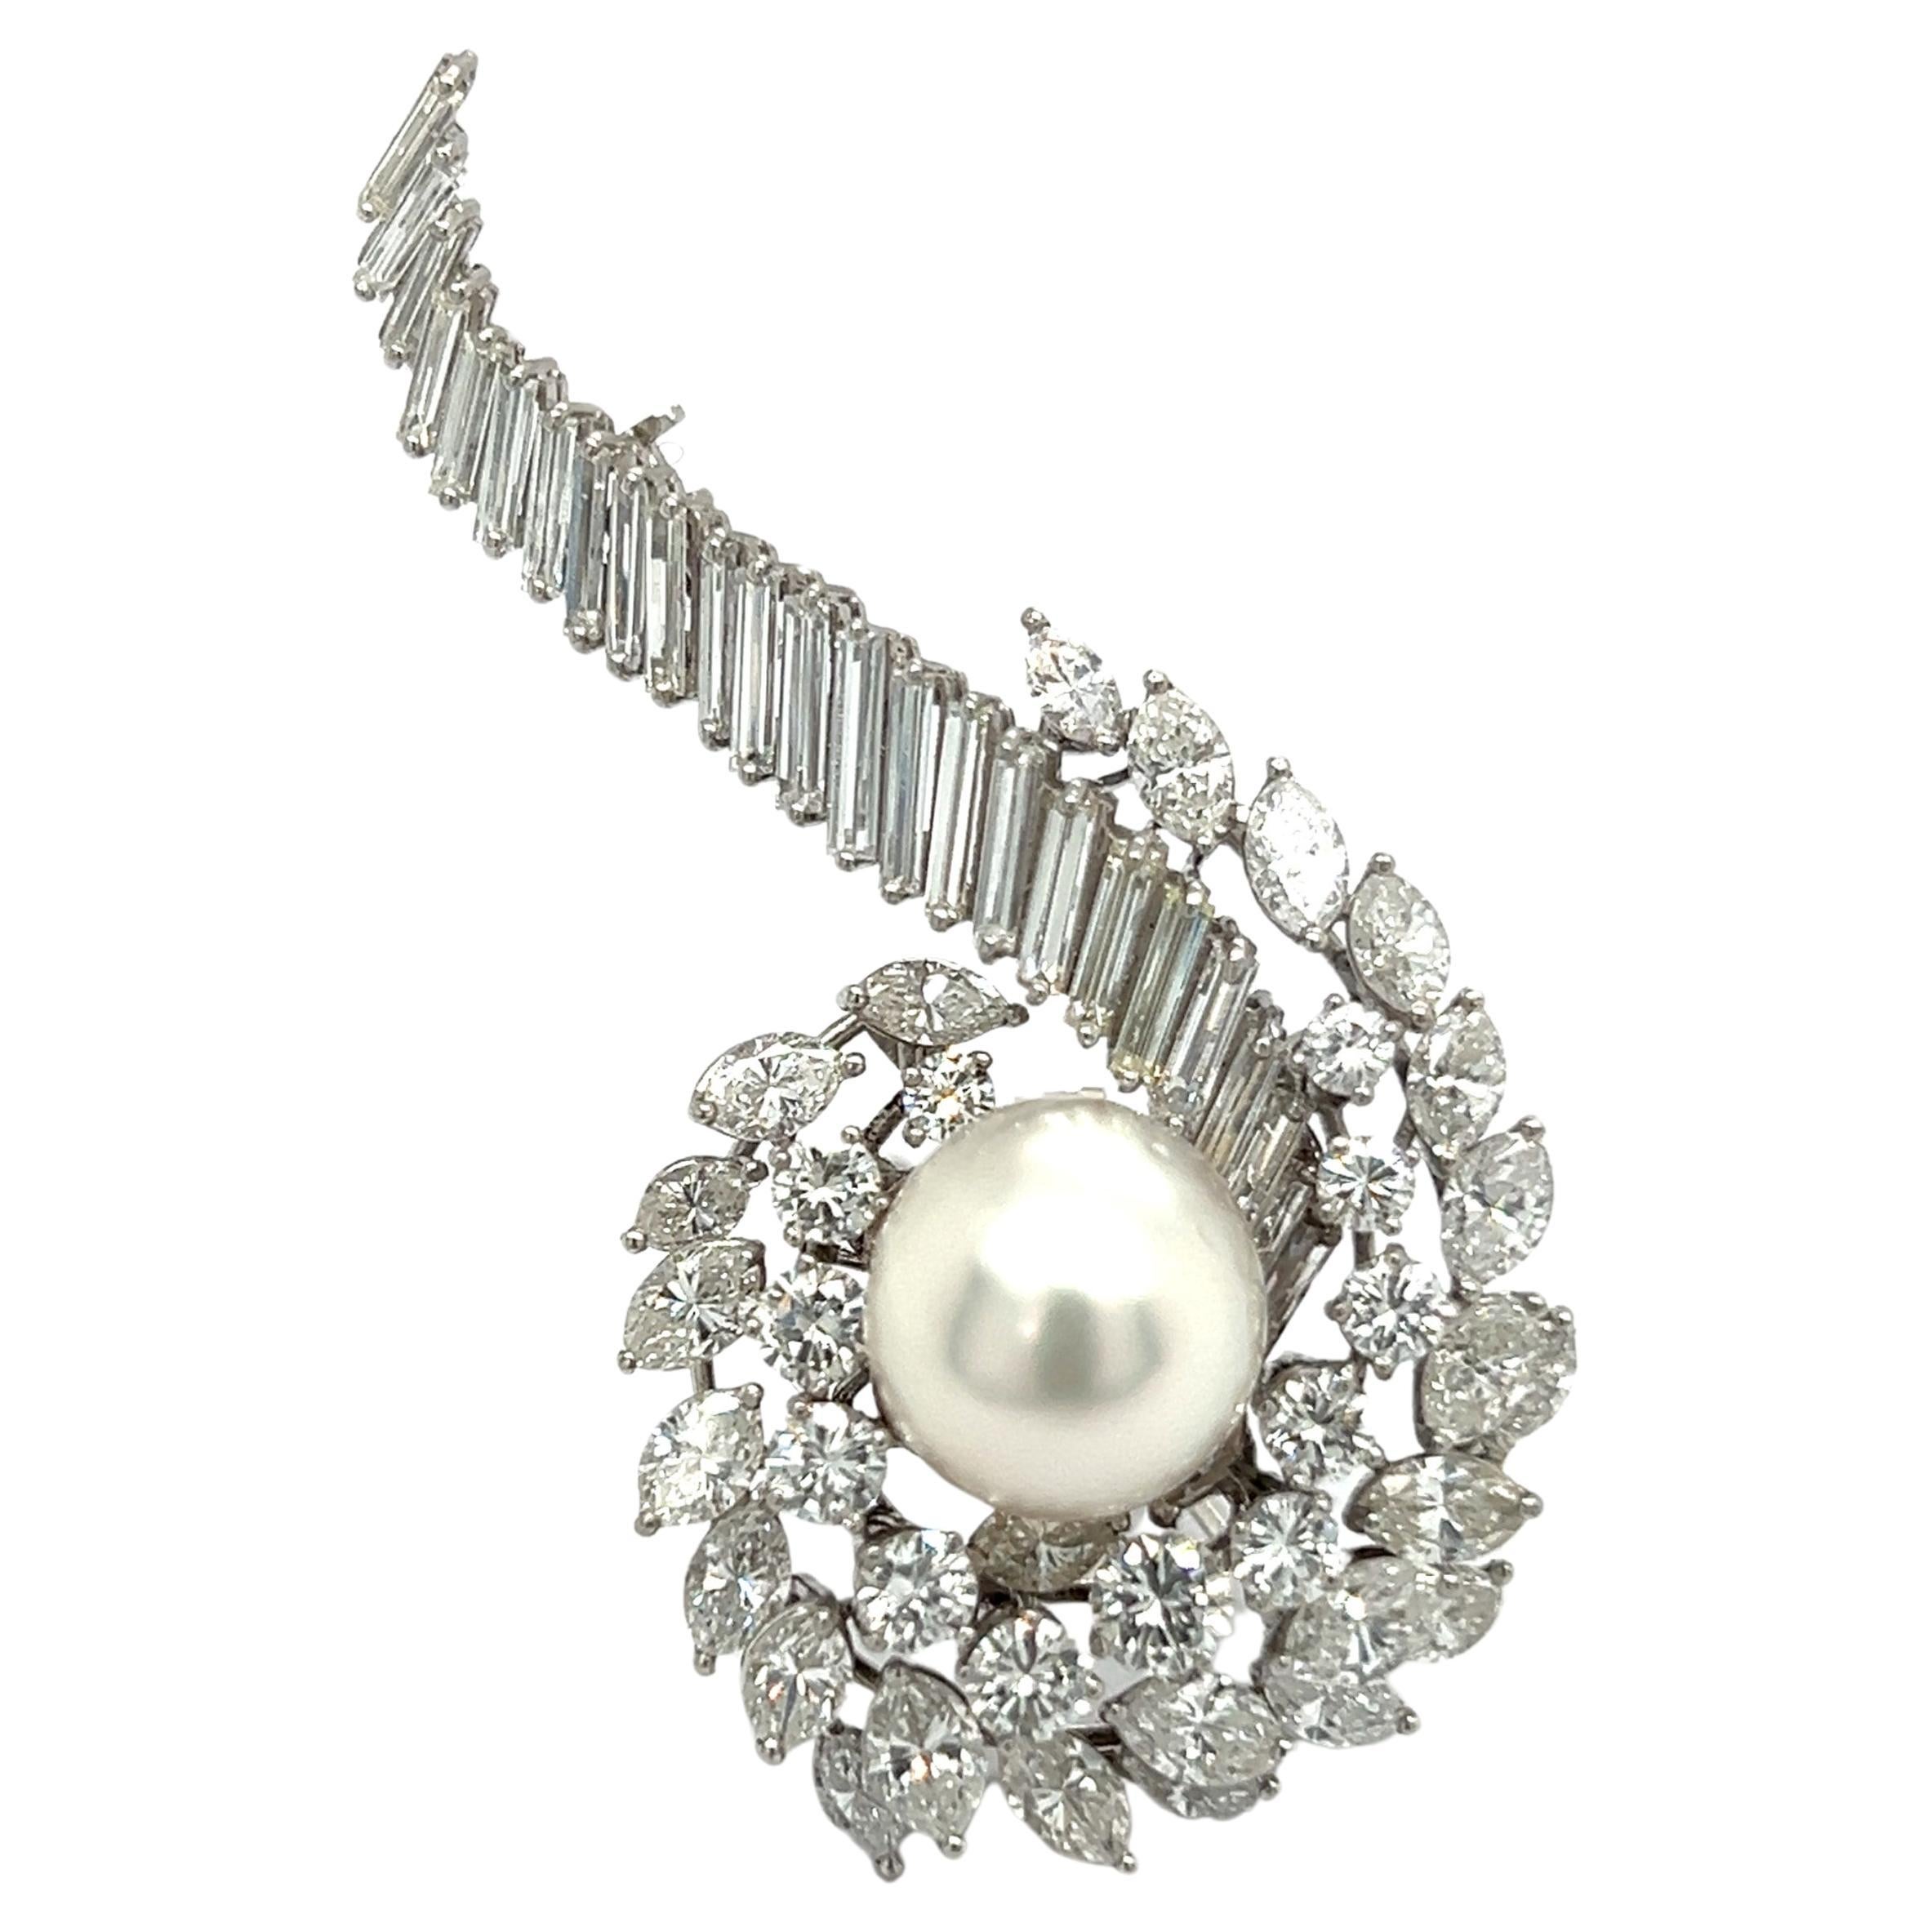 Brooch with South Sea Cultural Pearl & Diamonds in 18 Karat White Gold